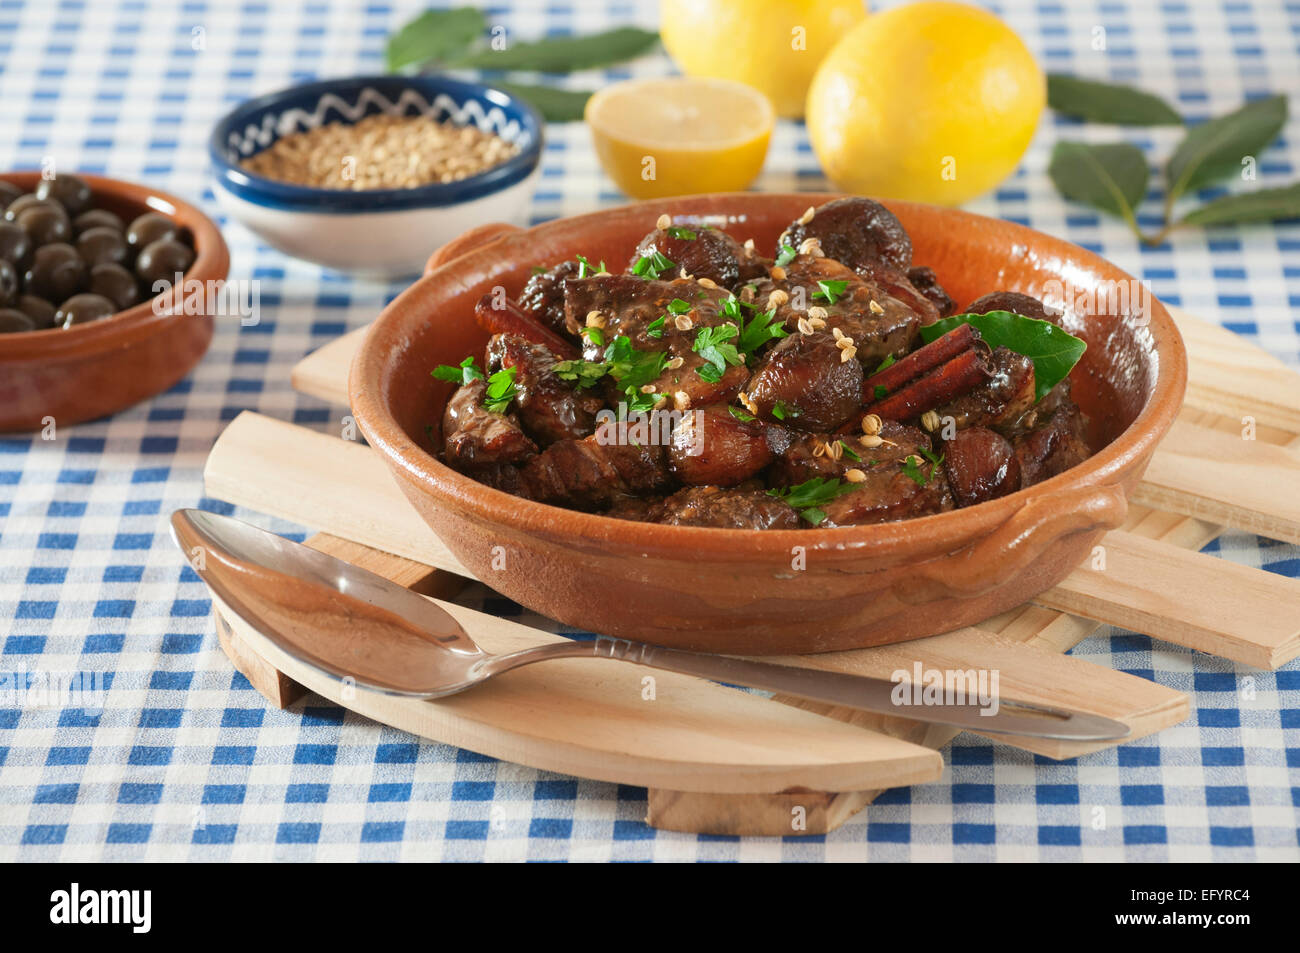 Afelia. Pork with red wine and coriander seed. Stock Photo